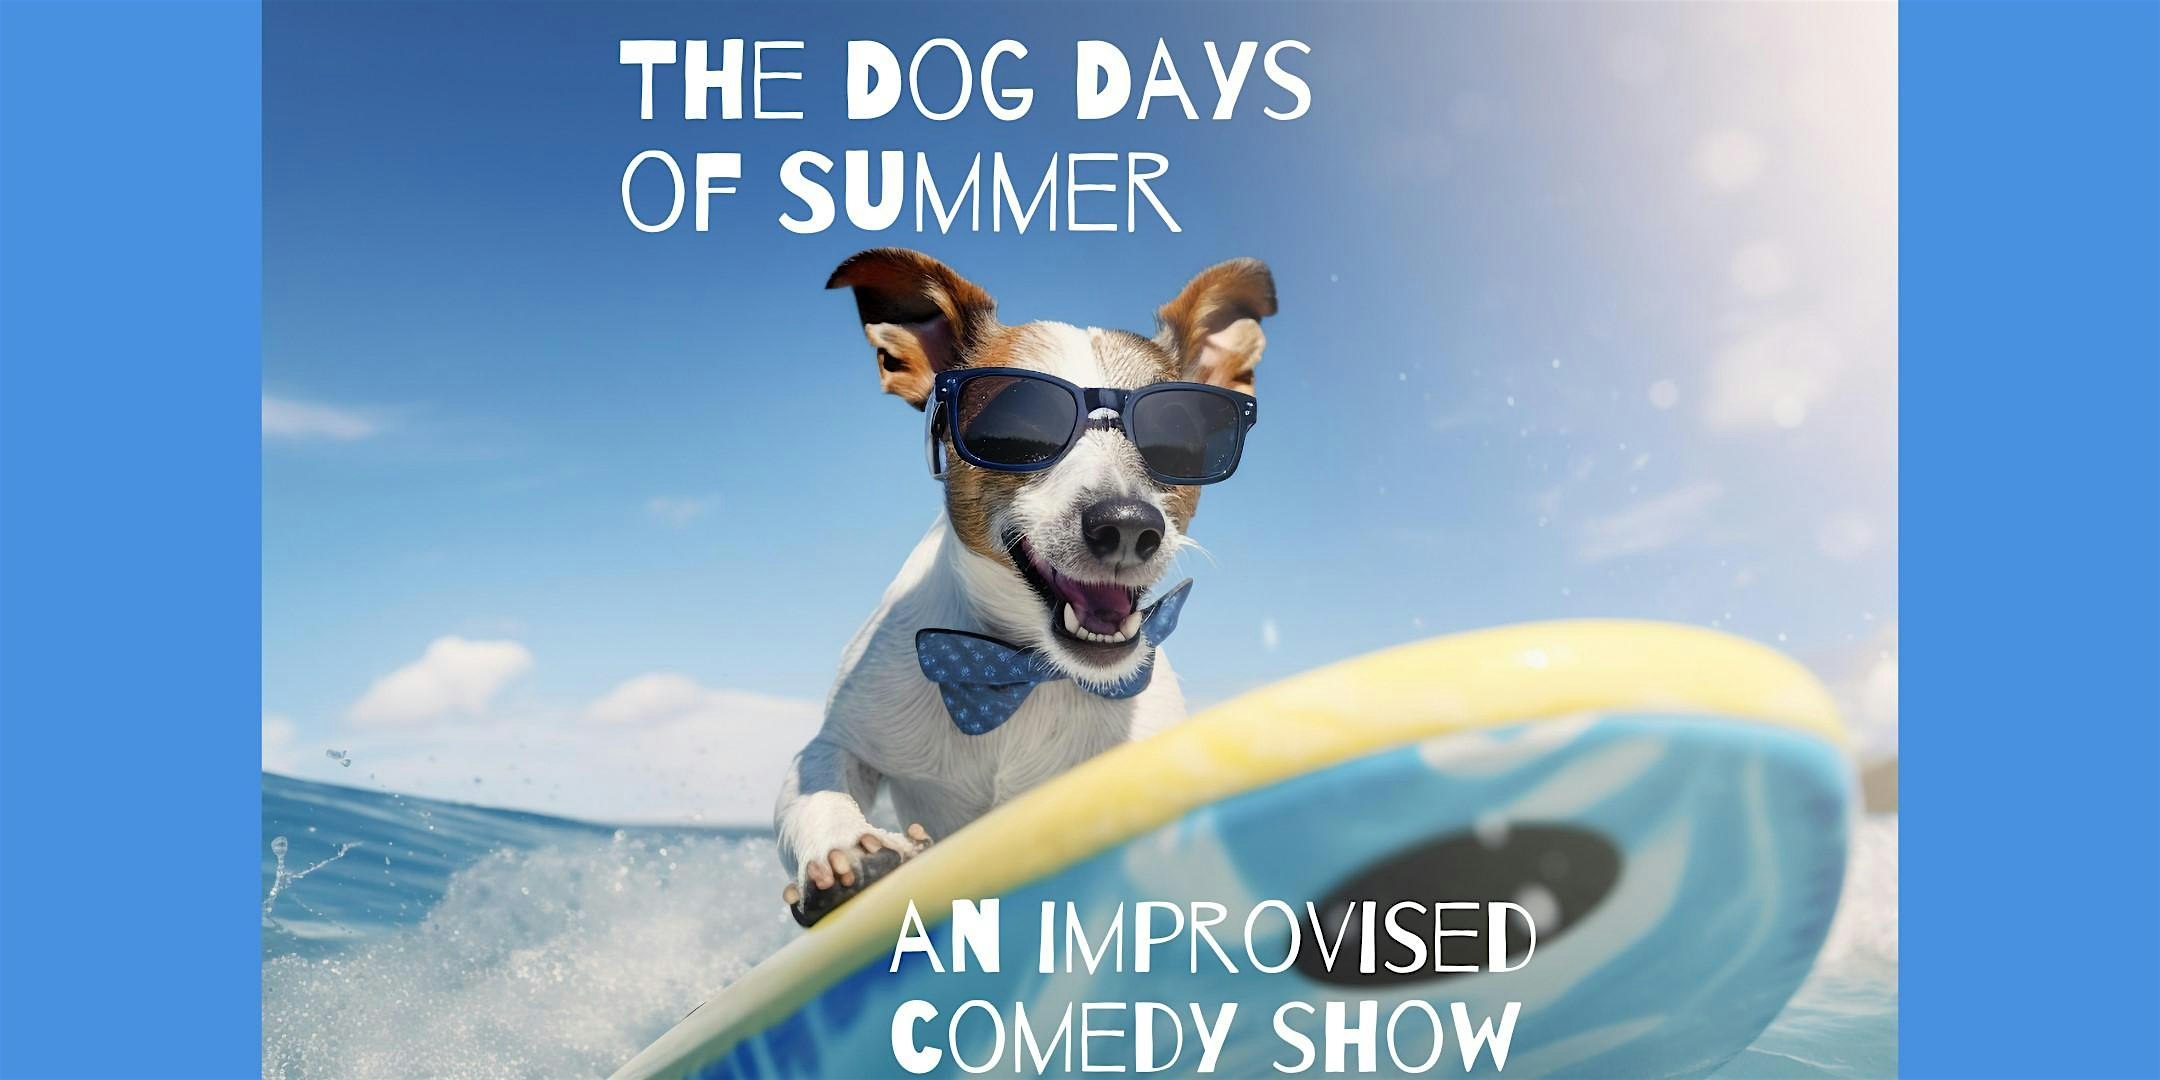 The Dog Days of Summer: An Improvised Comedy Show That's All About Dogs!